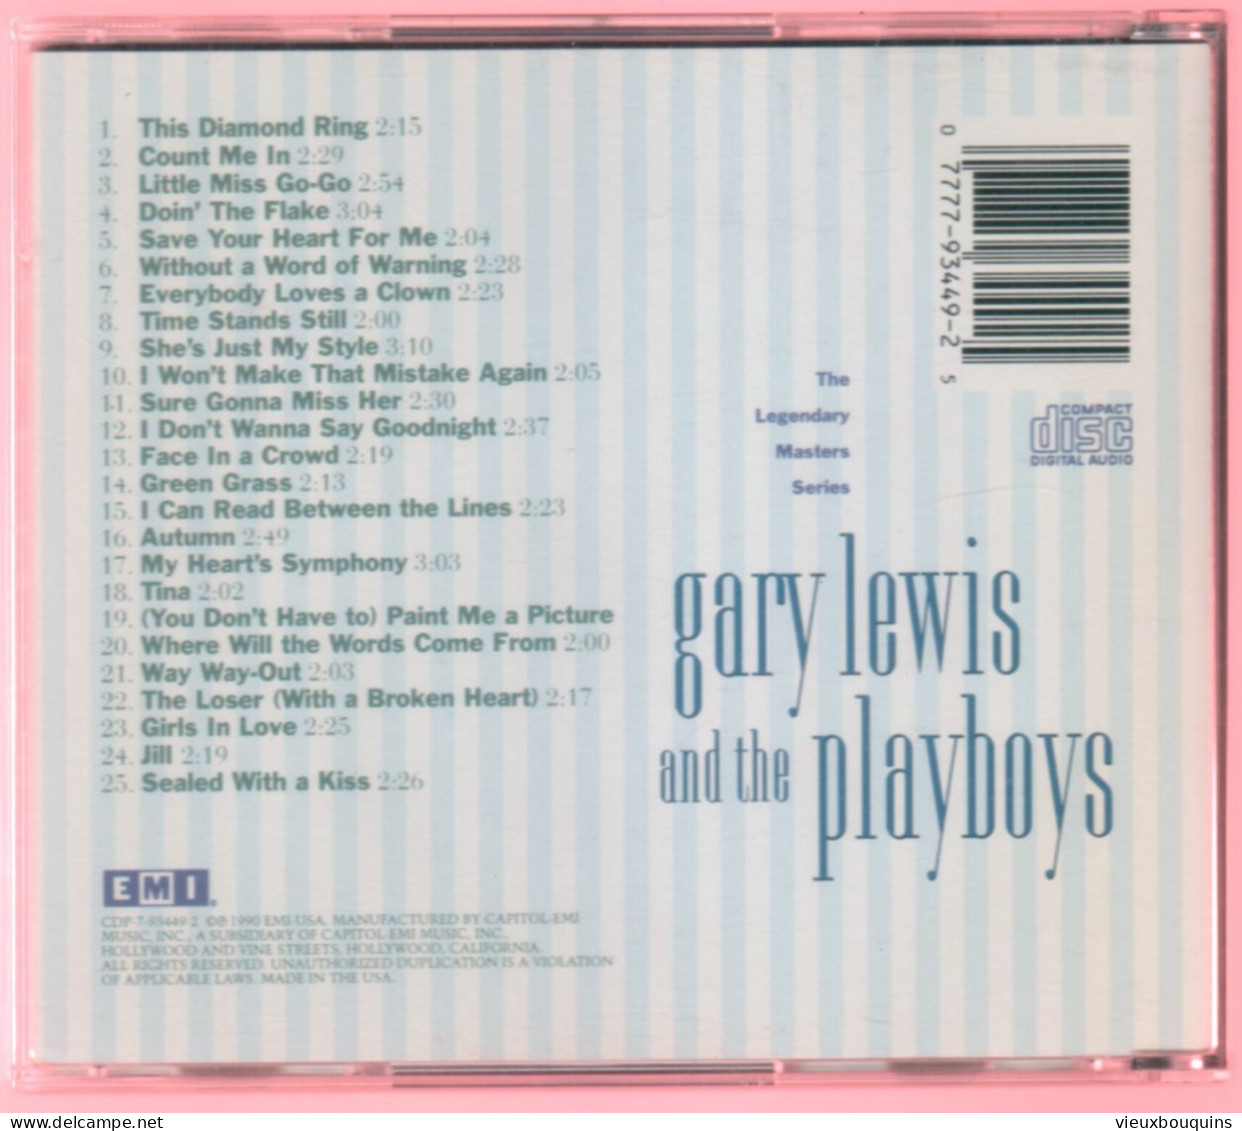 GARY LEWIS AND THE PLAYBOYS (Legendary Masters Series) - Sonstige - Englische Musik